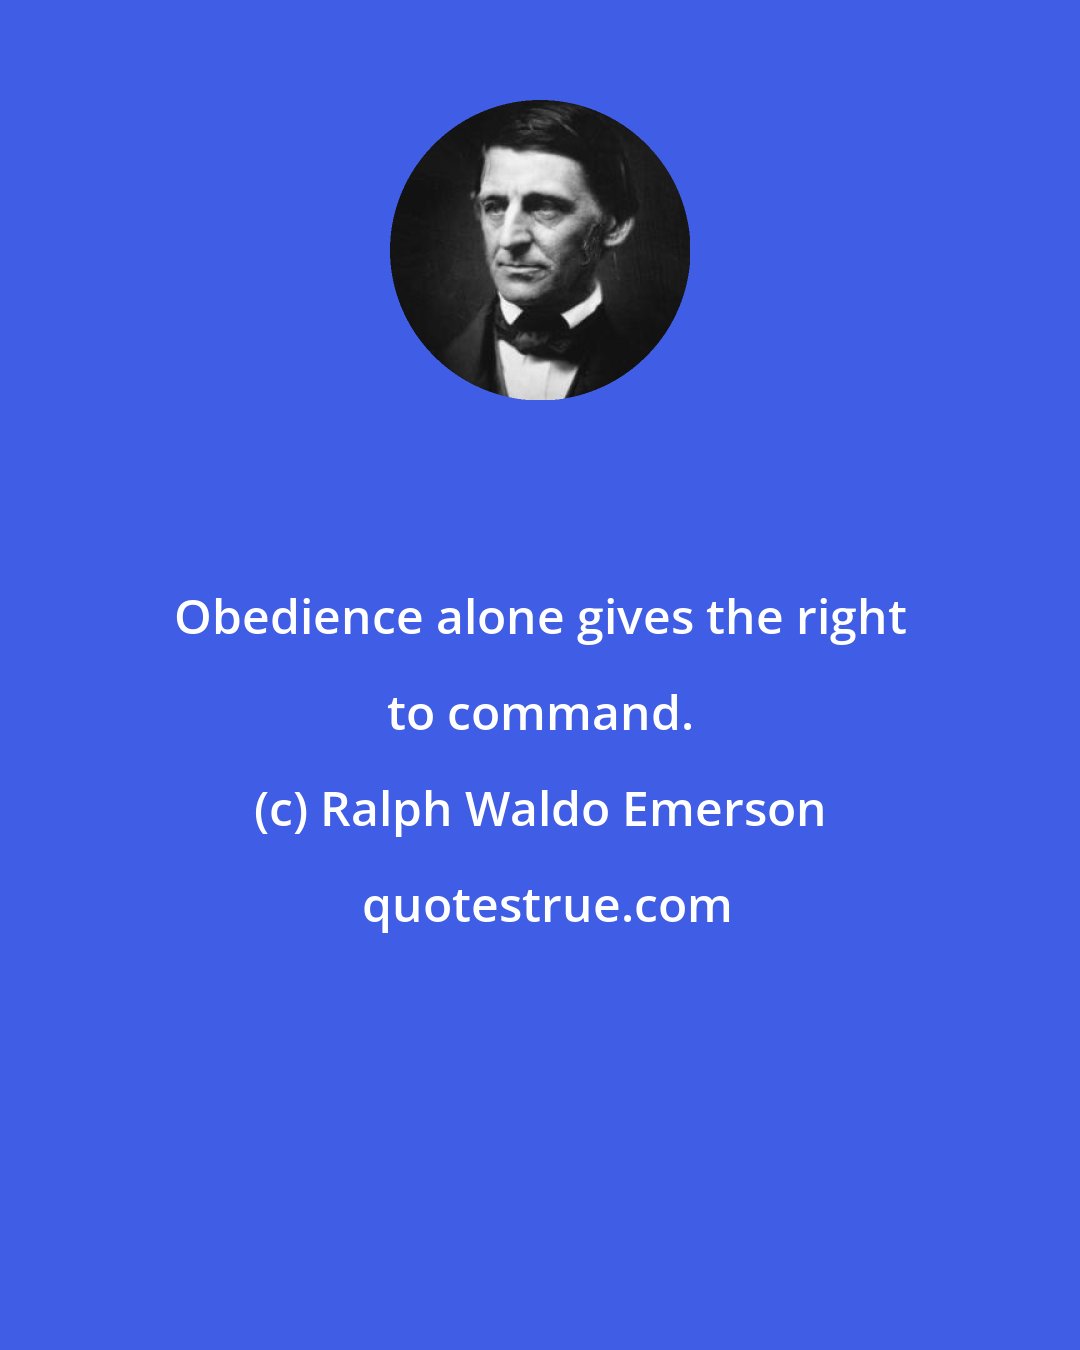 Ralph Waldo Emerson: Obedience alone gives the right to command.